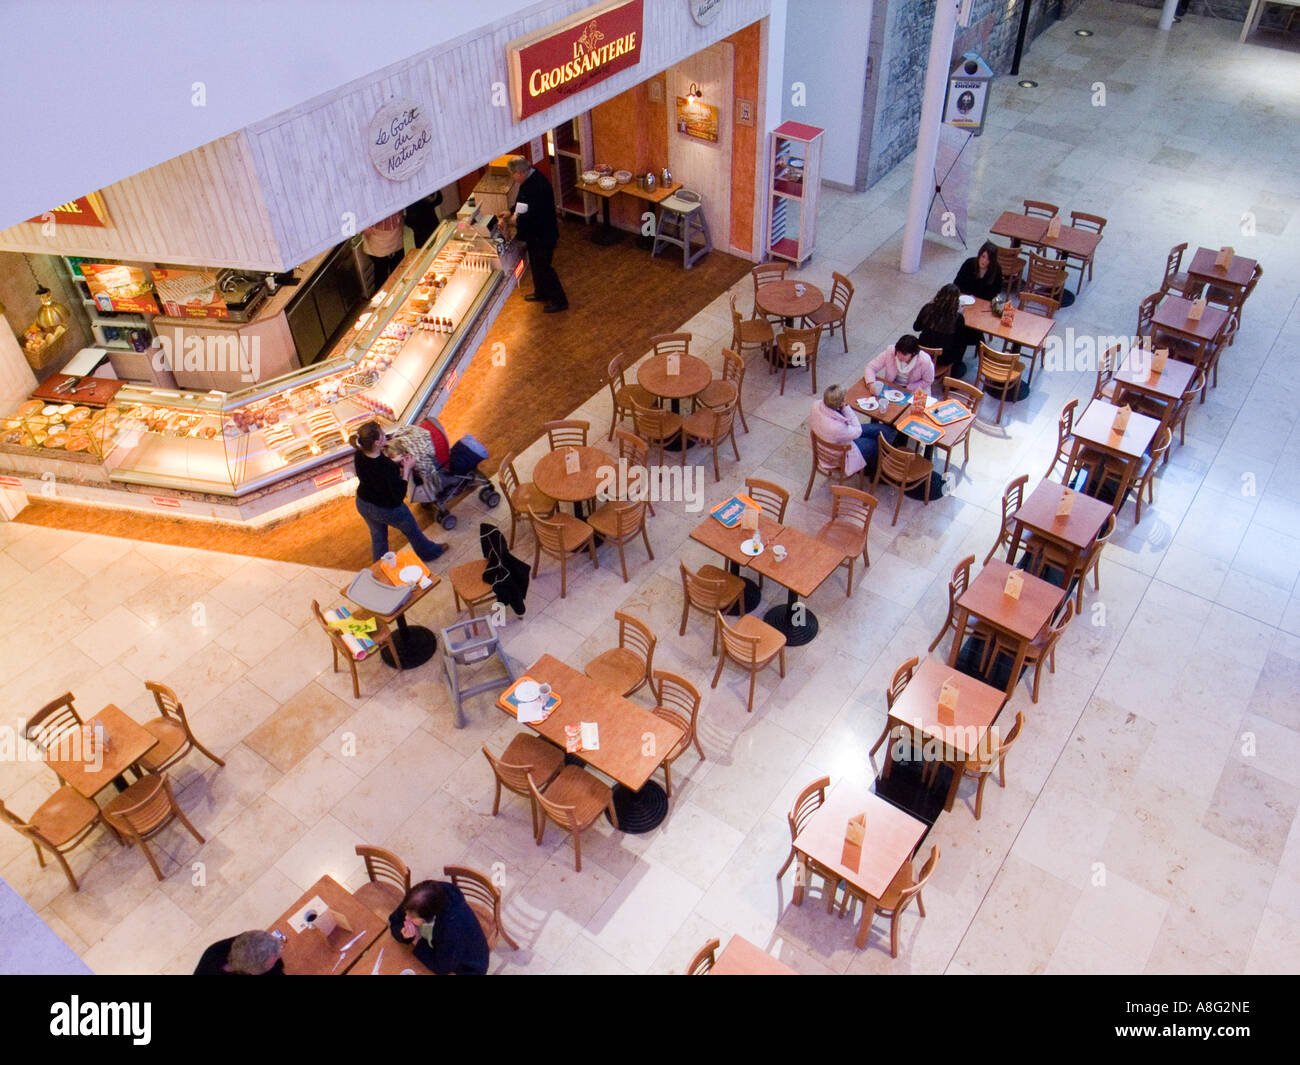 Corner cafe in a shopping mall Stock Photo